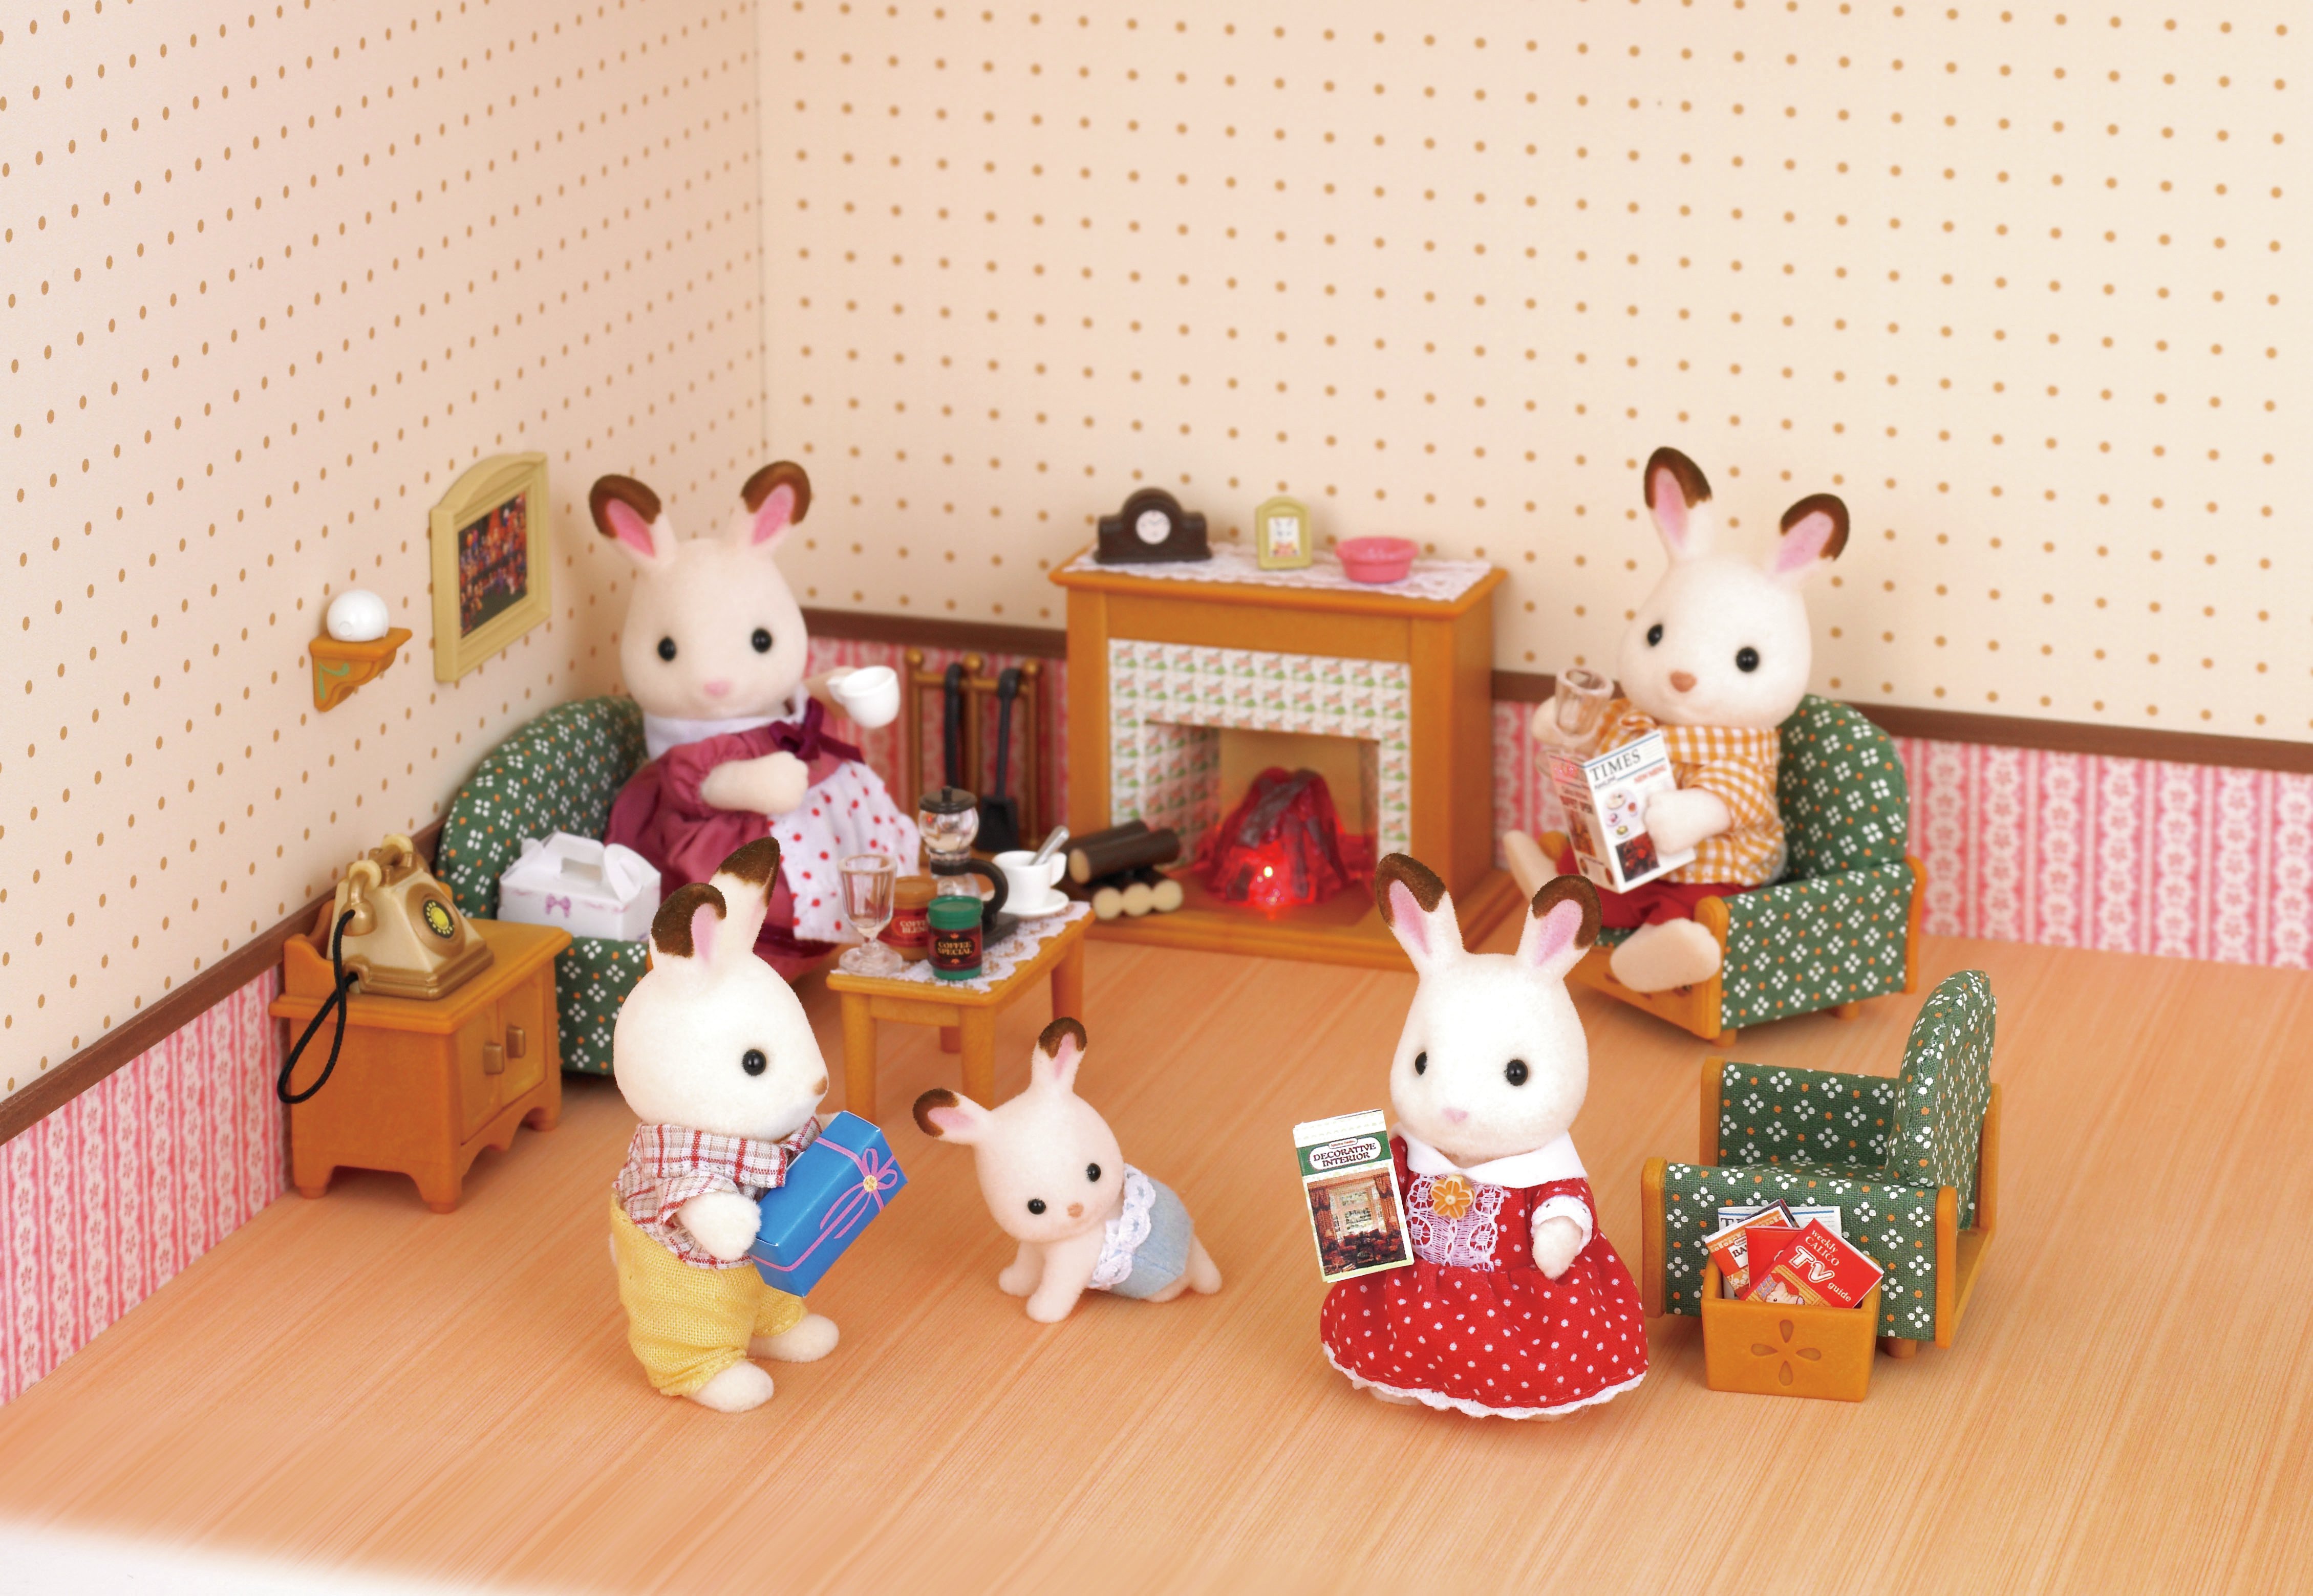 Sylvanian Families Kitchen And Living Room Collection